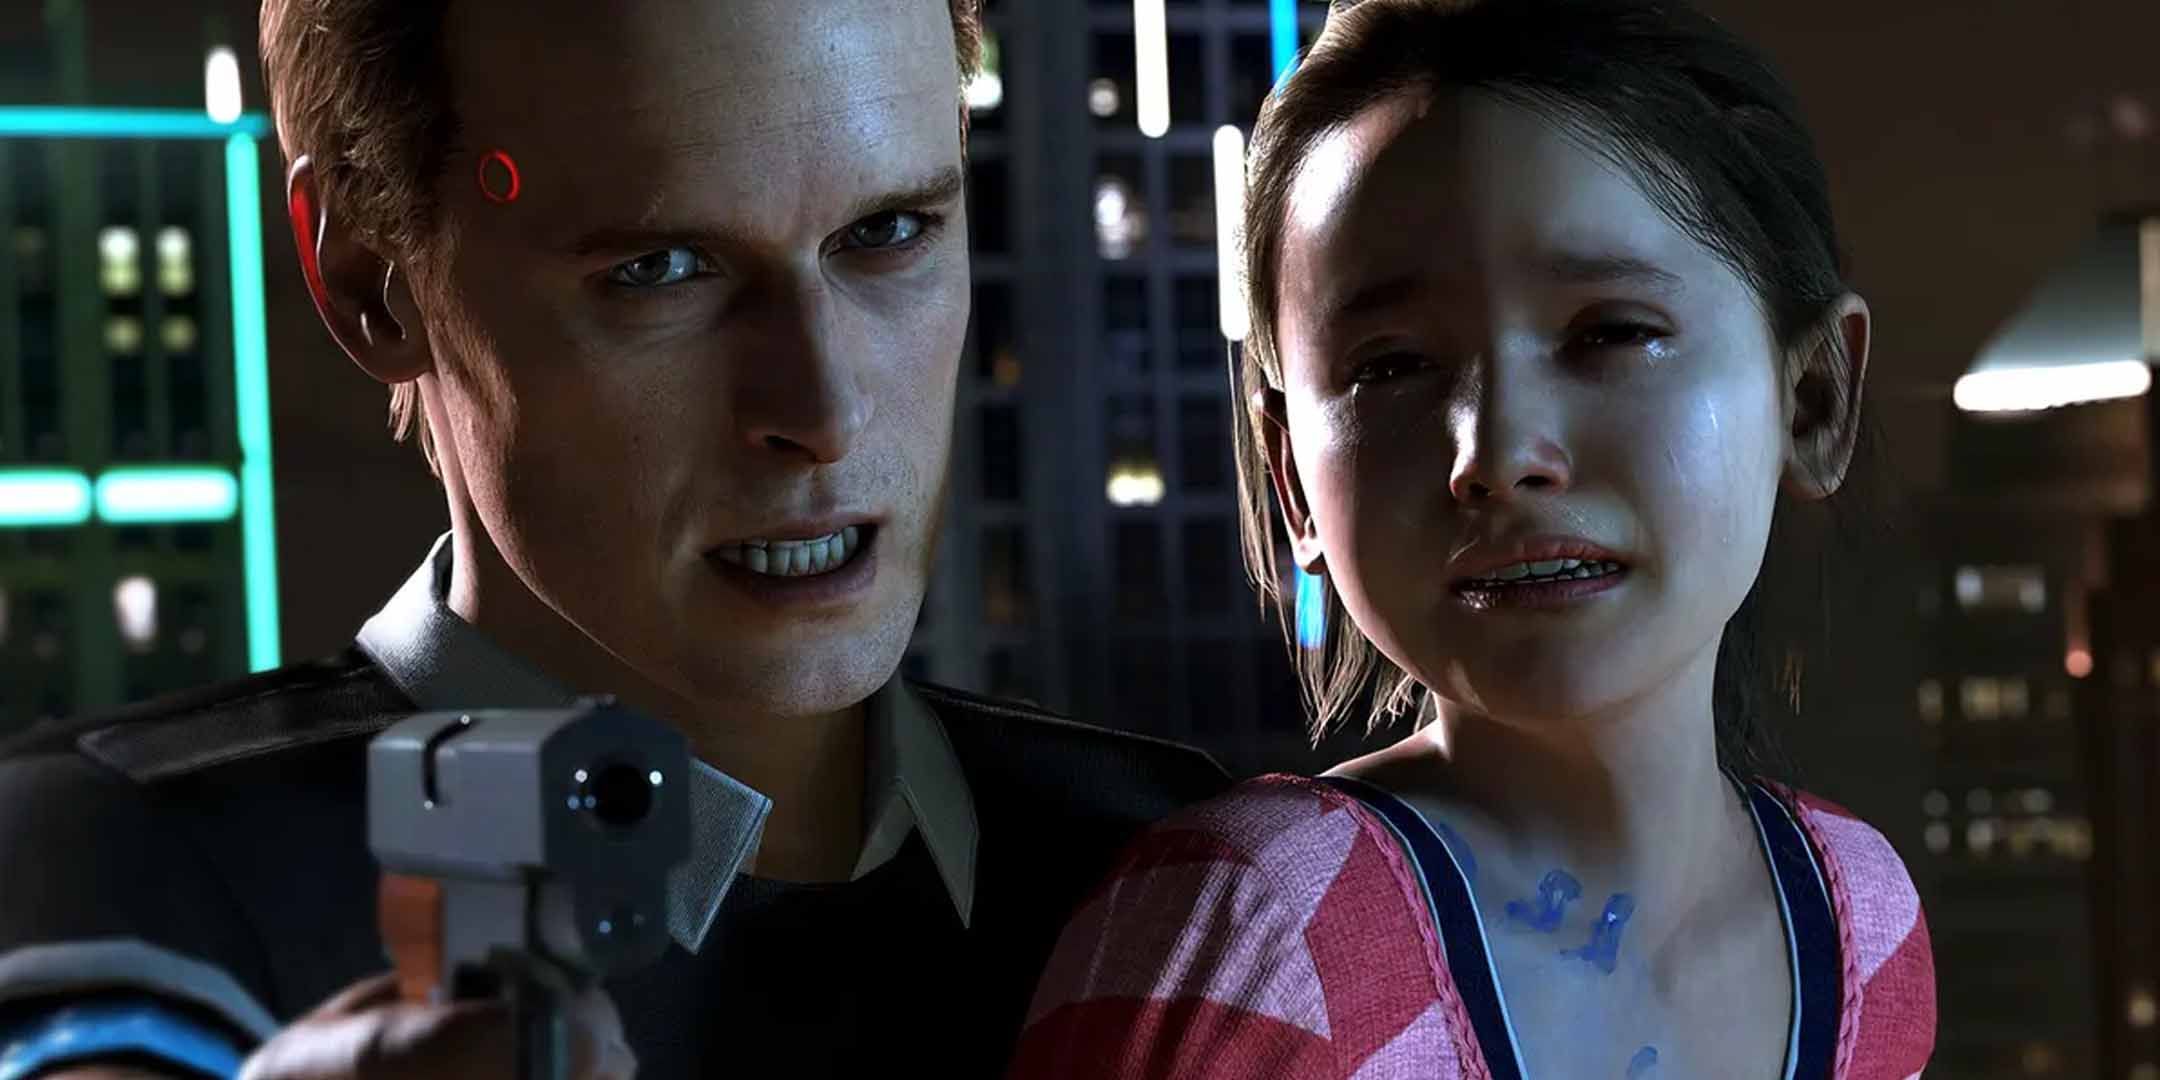 Android from Detroit: Become Human holding a gun and hostage